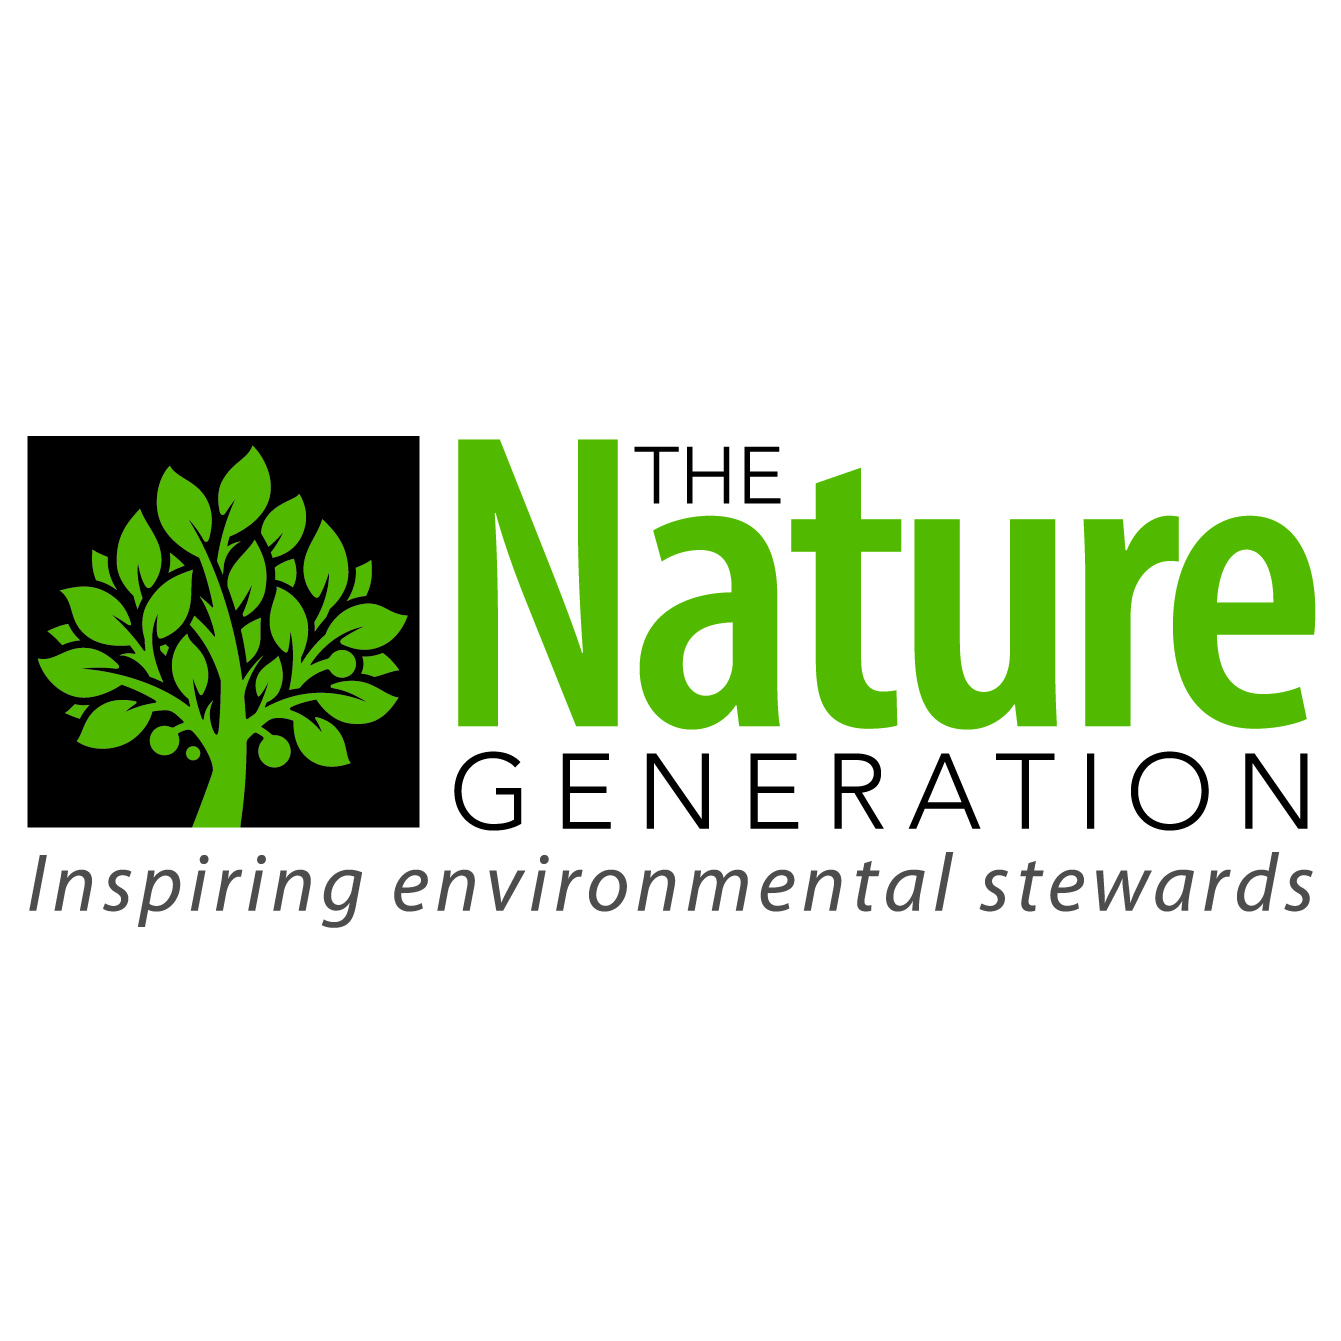 The Nature Generation